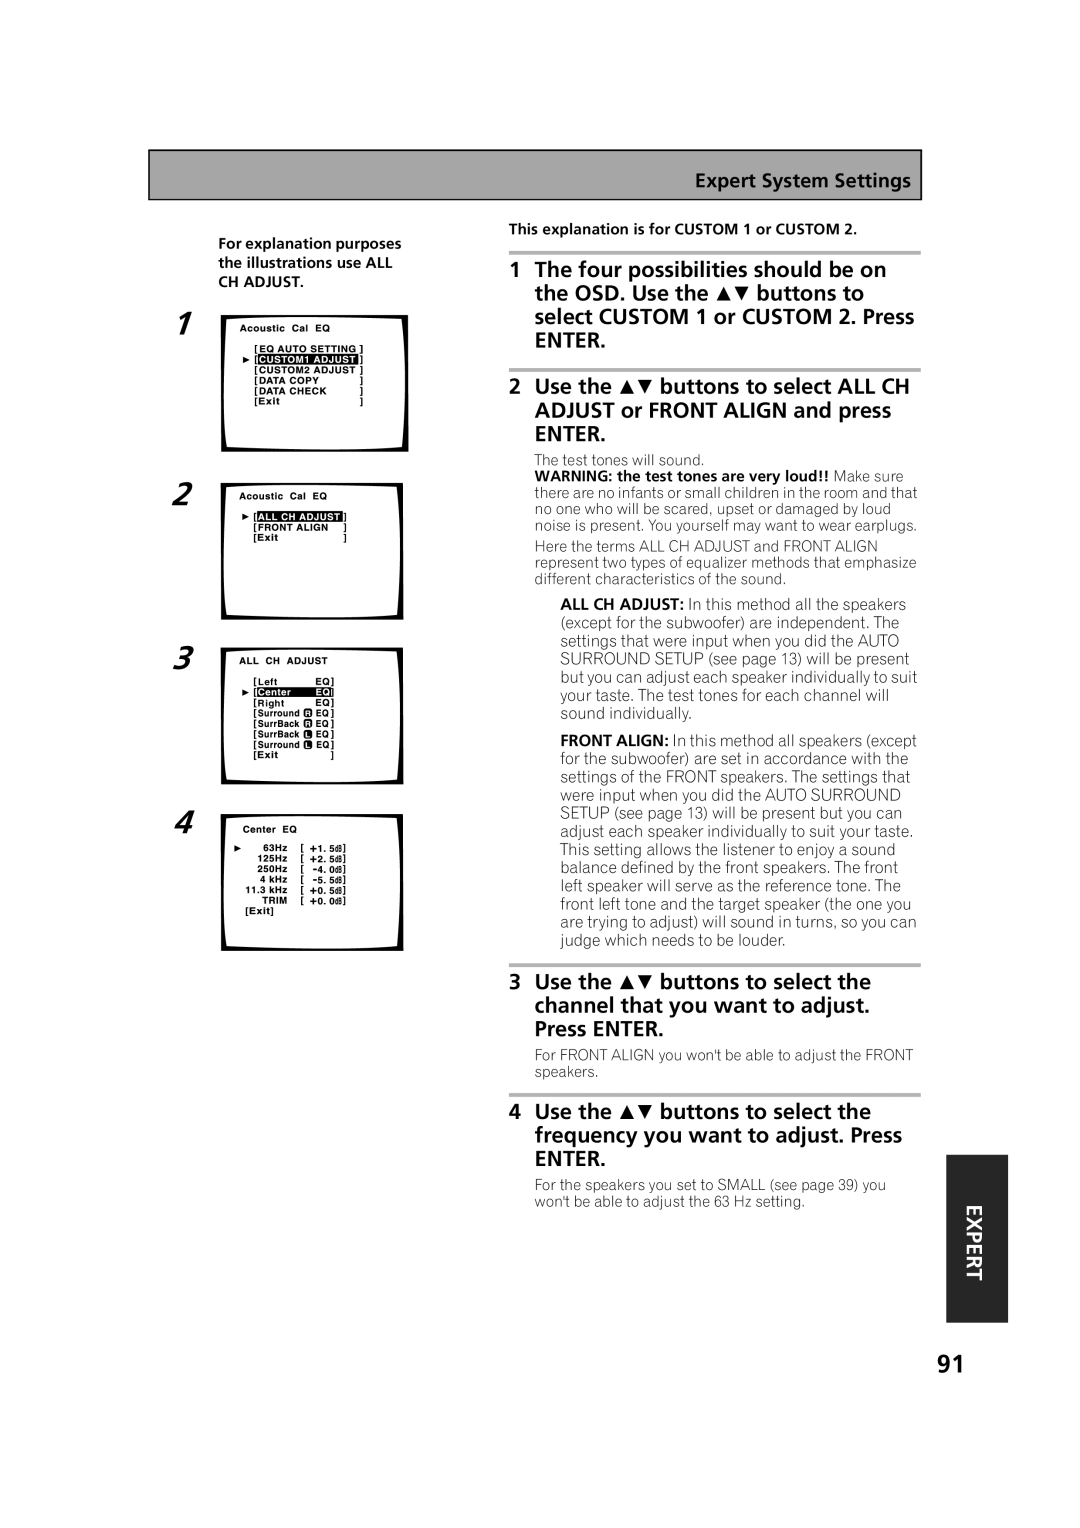 Pioneer VSX-53TX manual 1 2 3, Expert System Settings, For explanation purposes, the illustrations use ALL CH ADJUST 